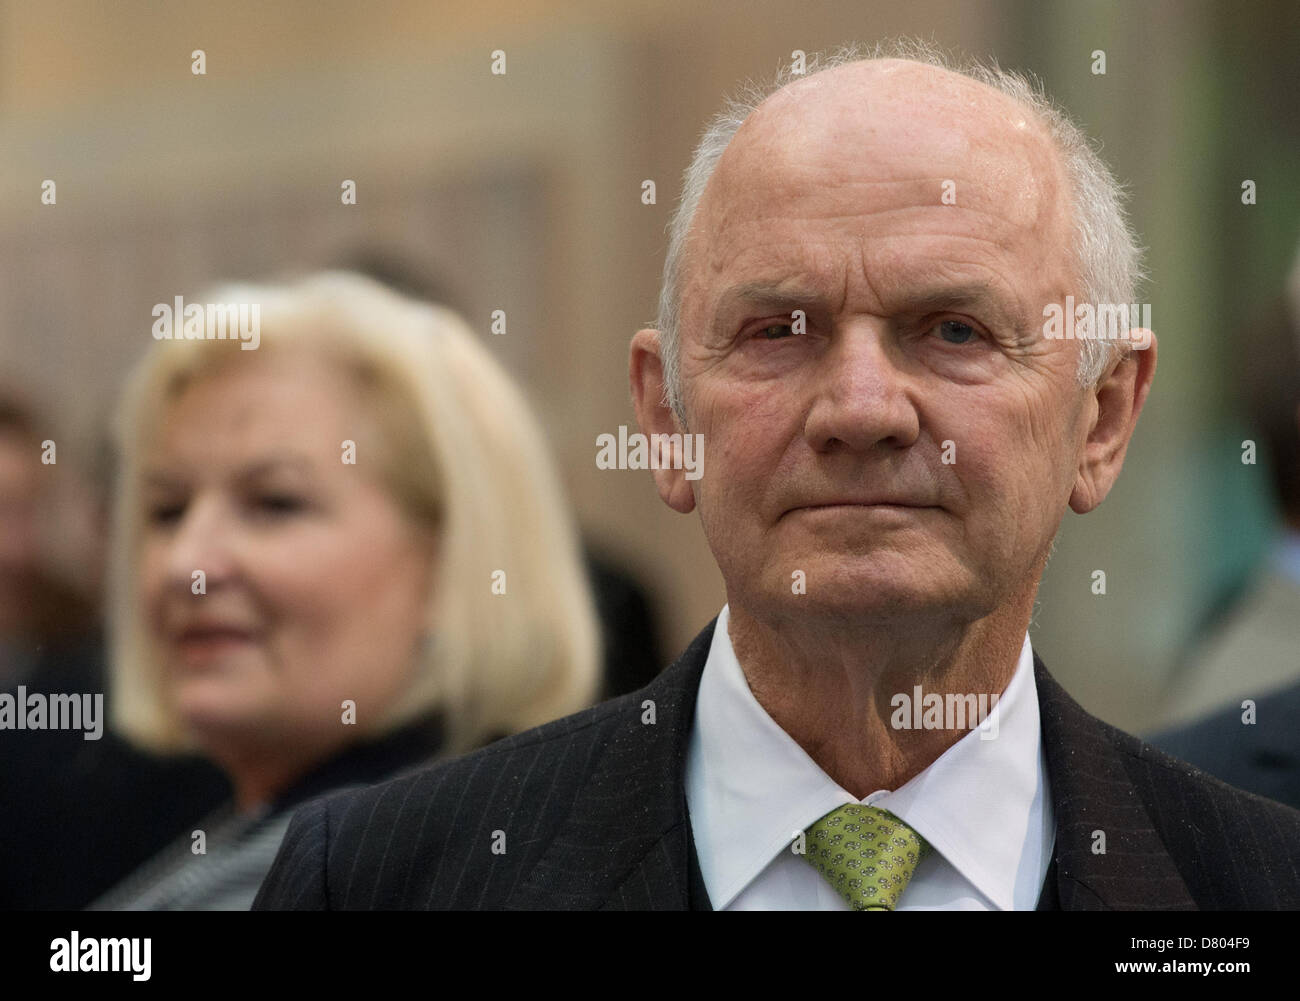 Volkswagen AG chairman of the supervisory board Ferdinand Piech and his wife Ursula Piech attend Audi's general meeting in Neckarsulm, Germany, 16 May 2013. Photo: MARIJAN MURAT Stock Photo